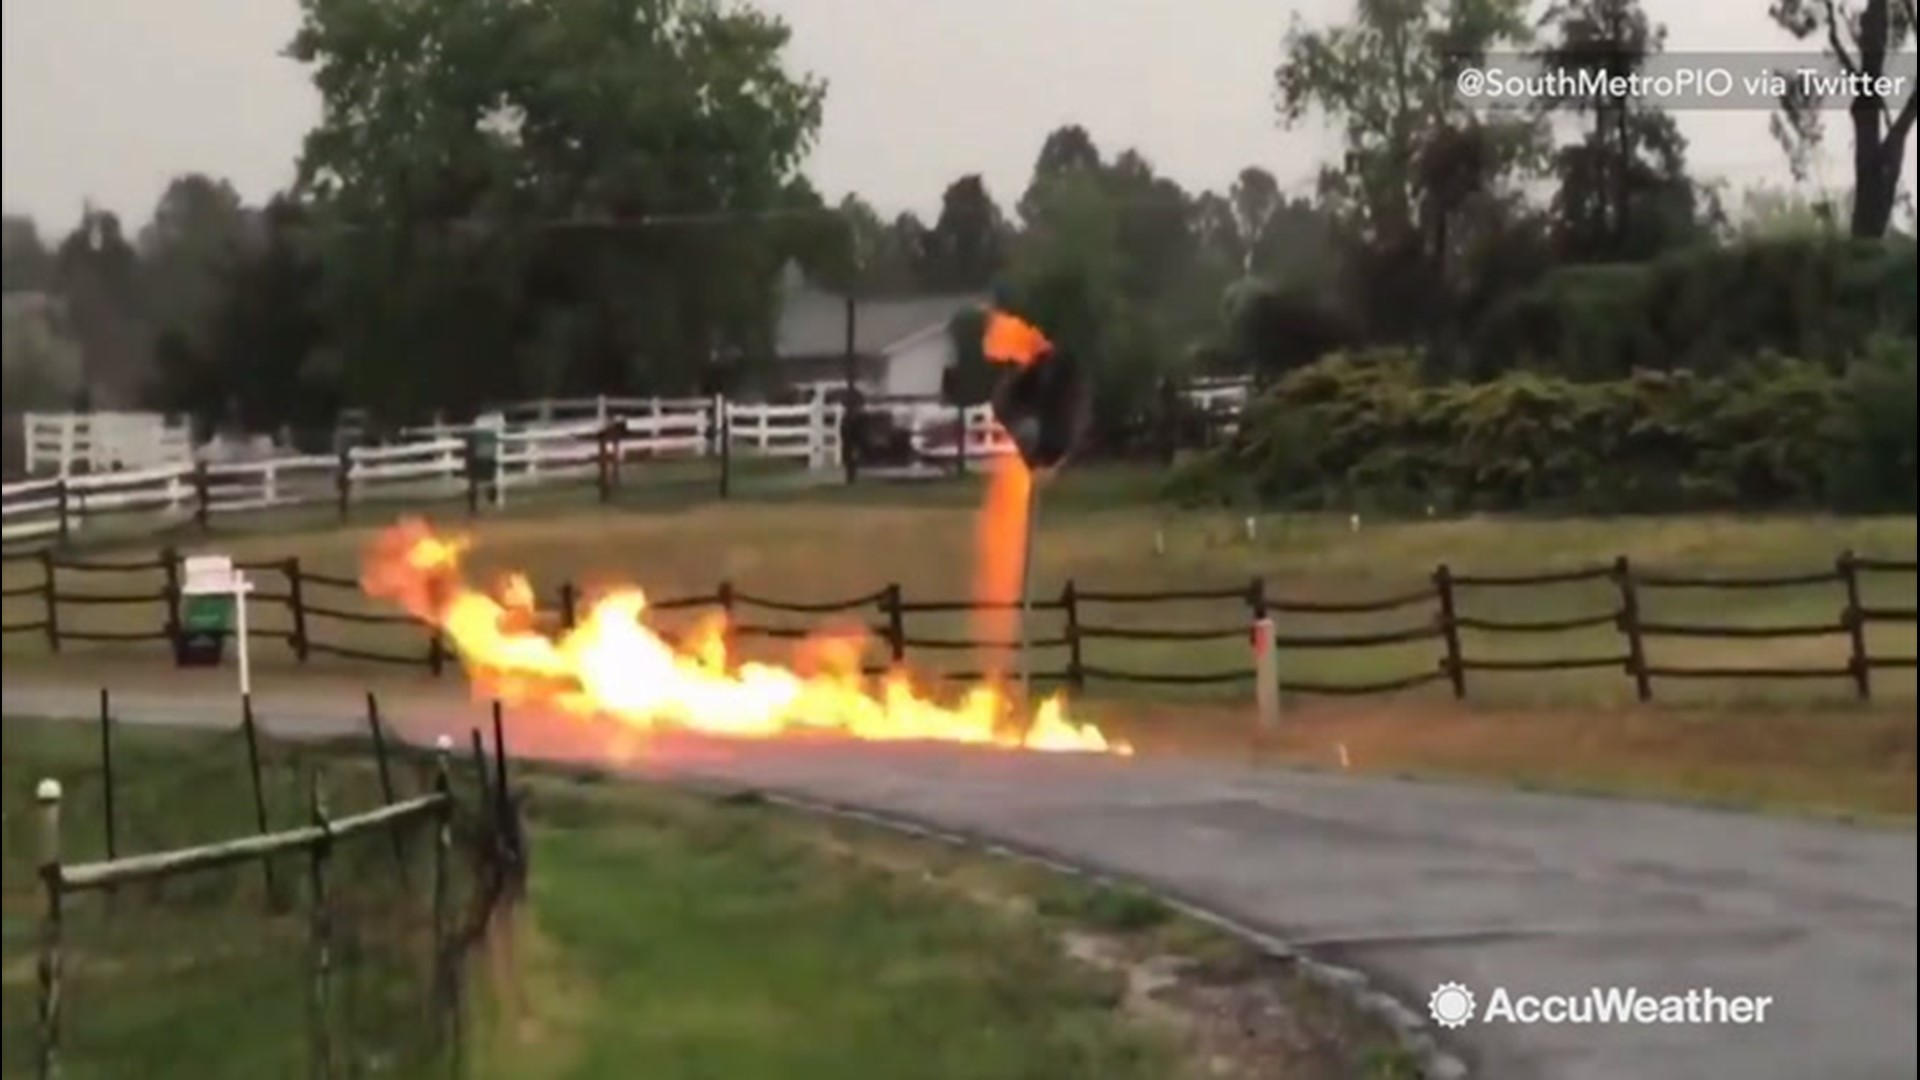 A street sign in Foxfield, Colorado, ignited into a raging fire on June 17, after lightning struck a nearby gas line. Firefighters were not able to put the fire out using water, as the gas line needed to be shutoff.